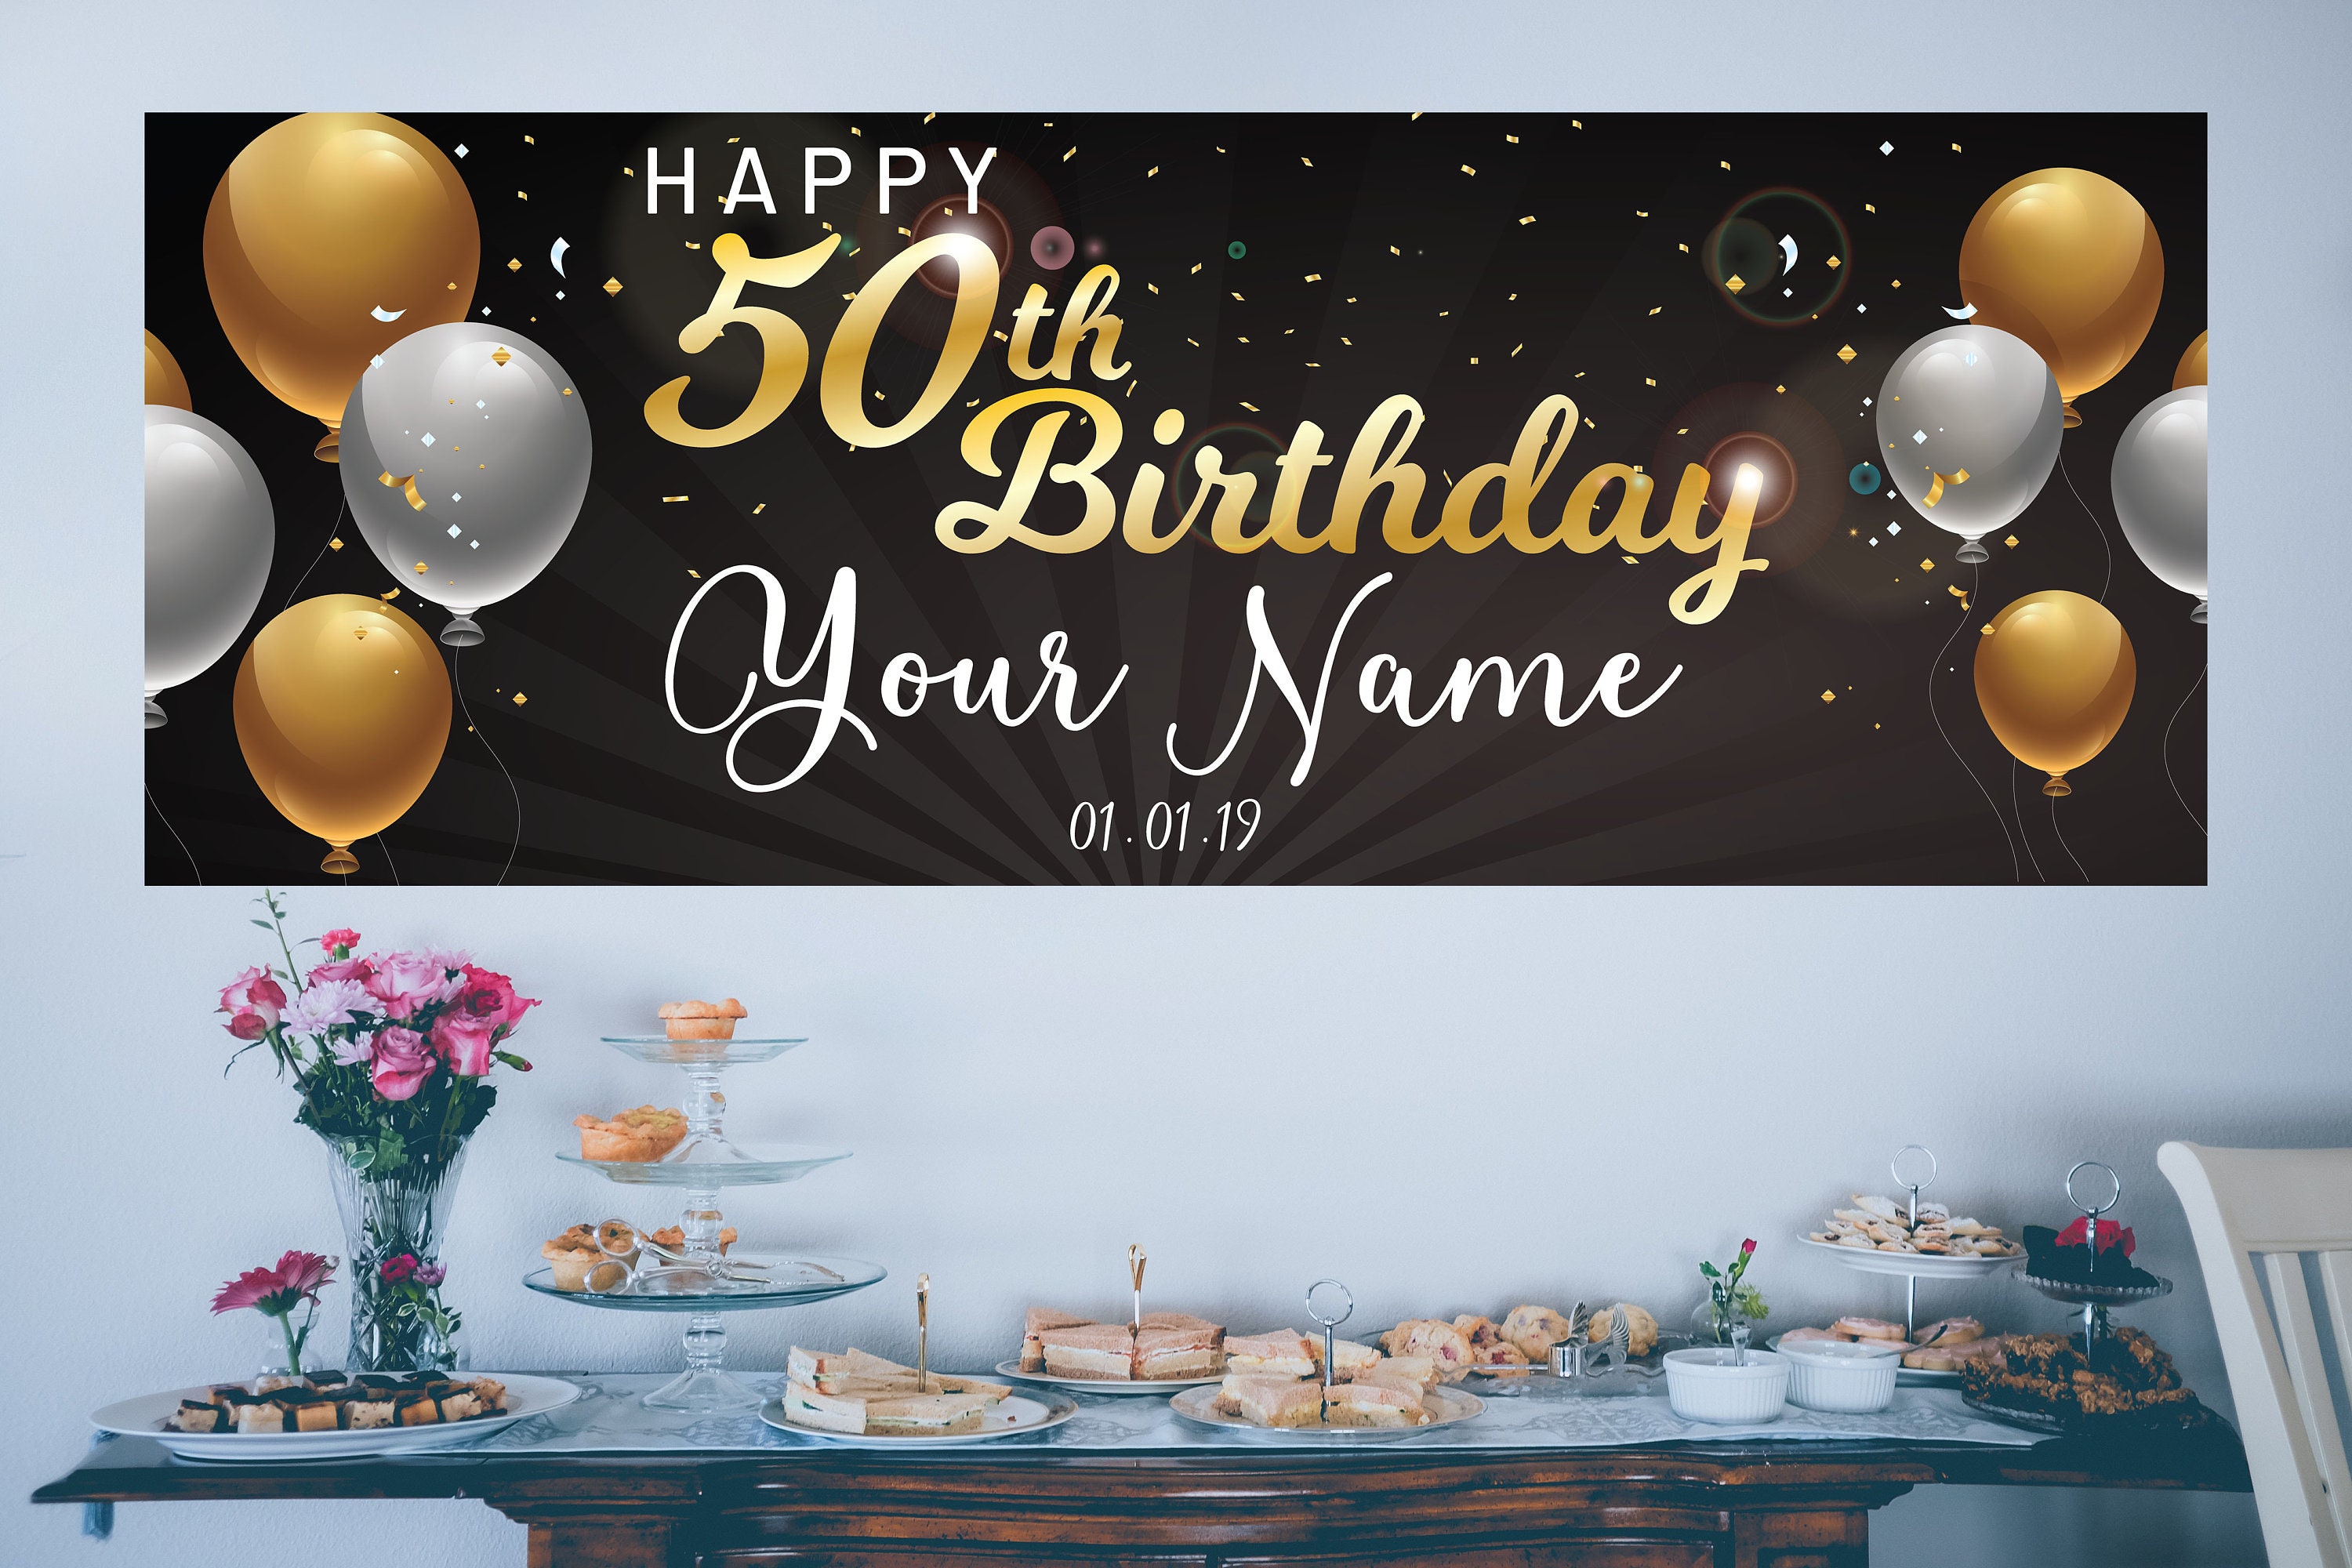 paper-party-supplies-personalized-birthday-banner-cindyclinic-jp